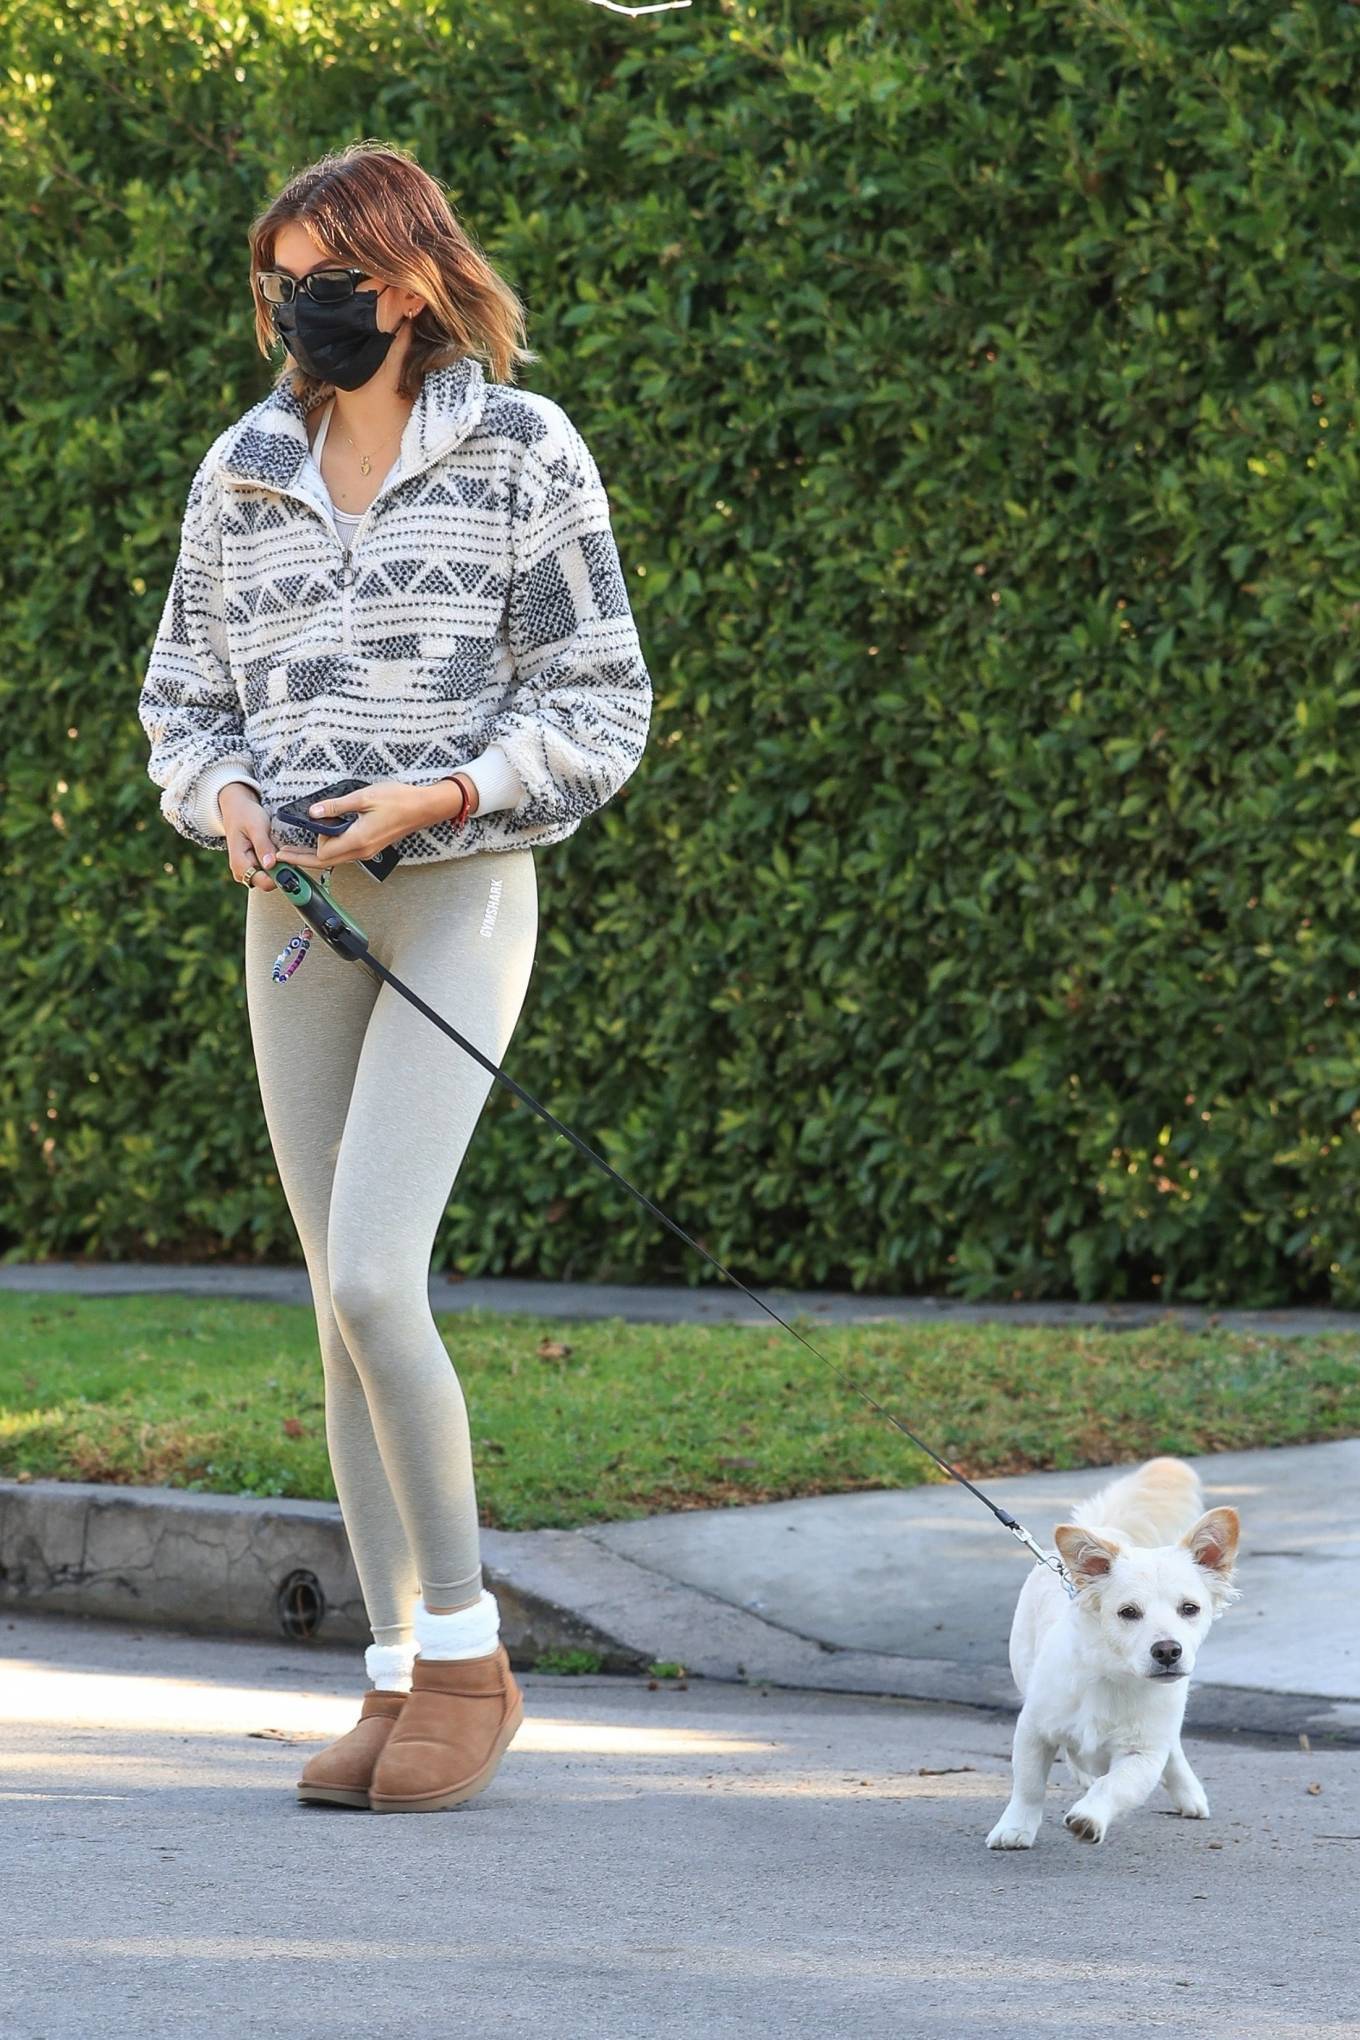 Kaia Gerber - Seen after pilates with her pooch in West Hollywood.